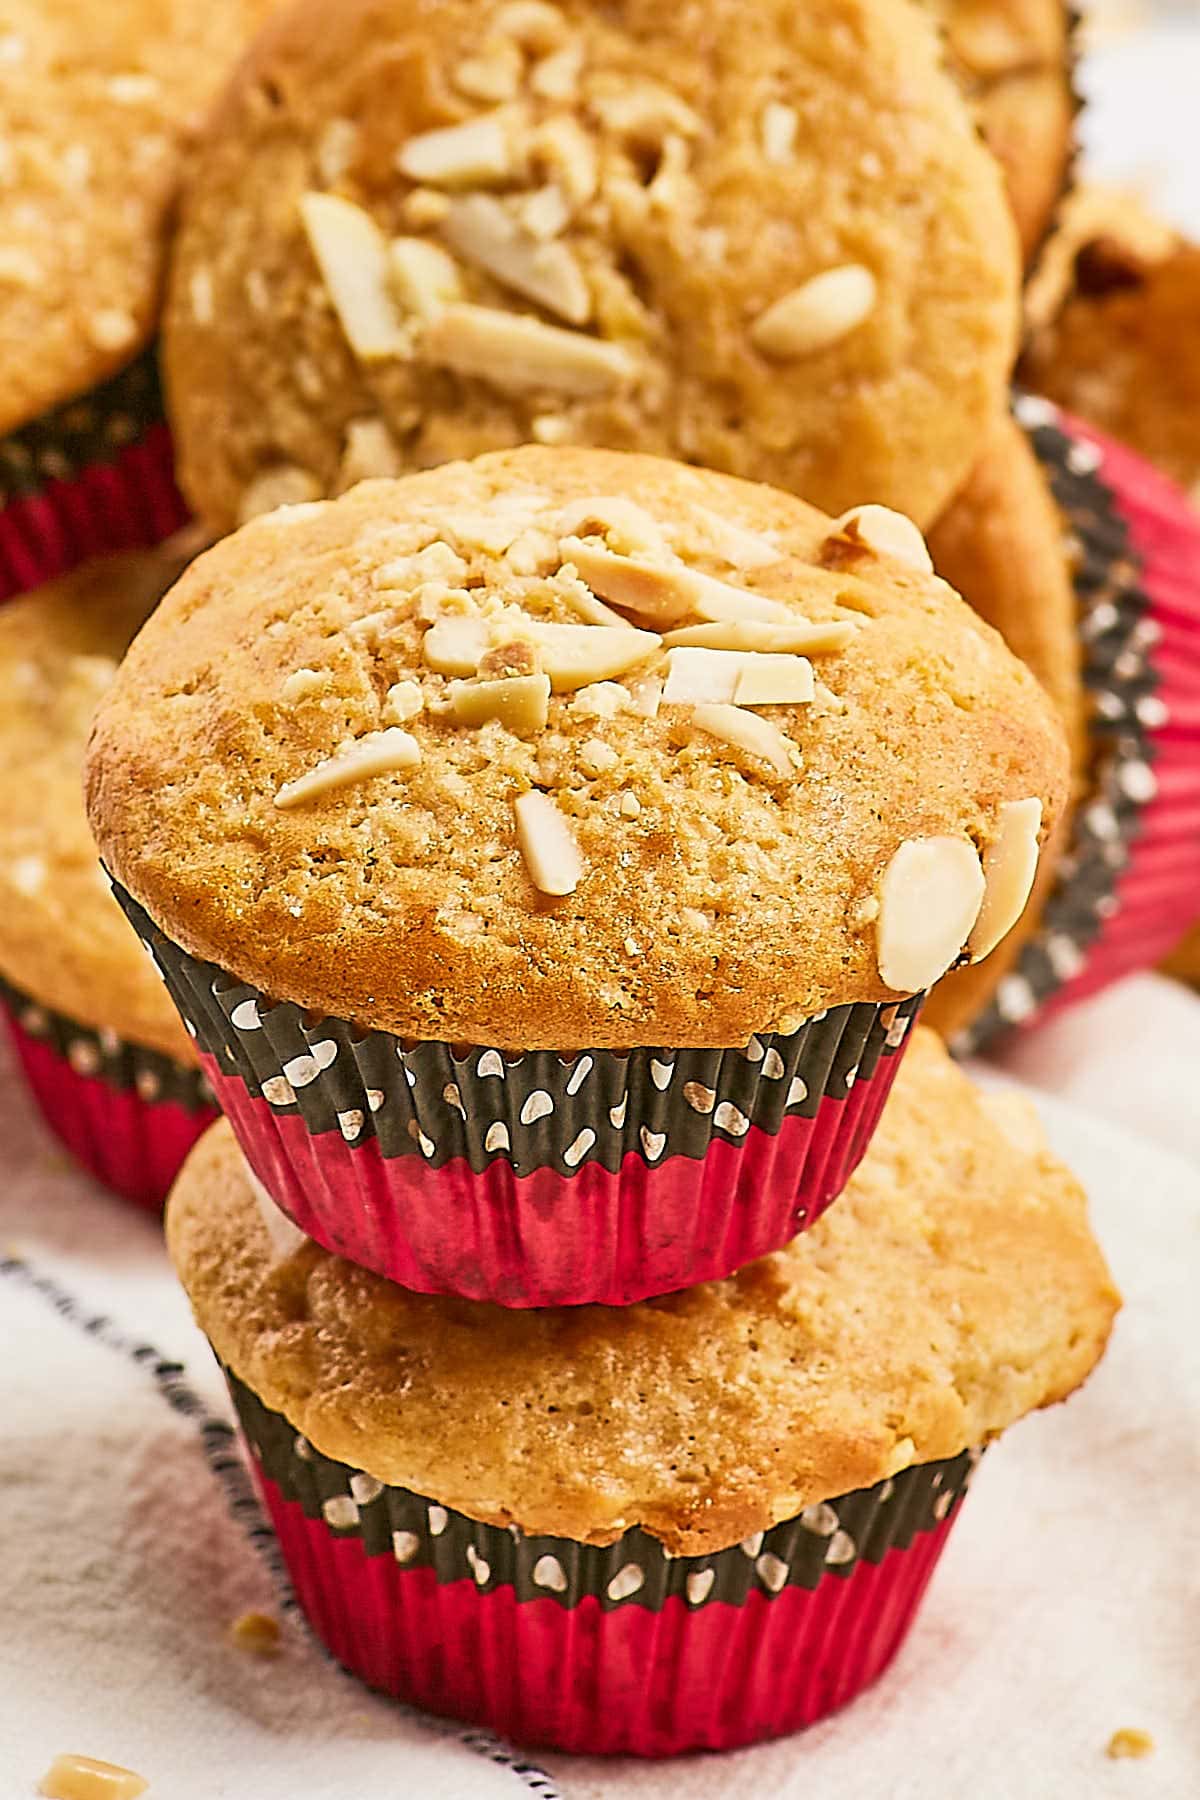 Banana Bread Muffins recipe by Cheerful Cook.